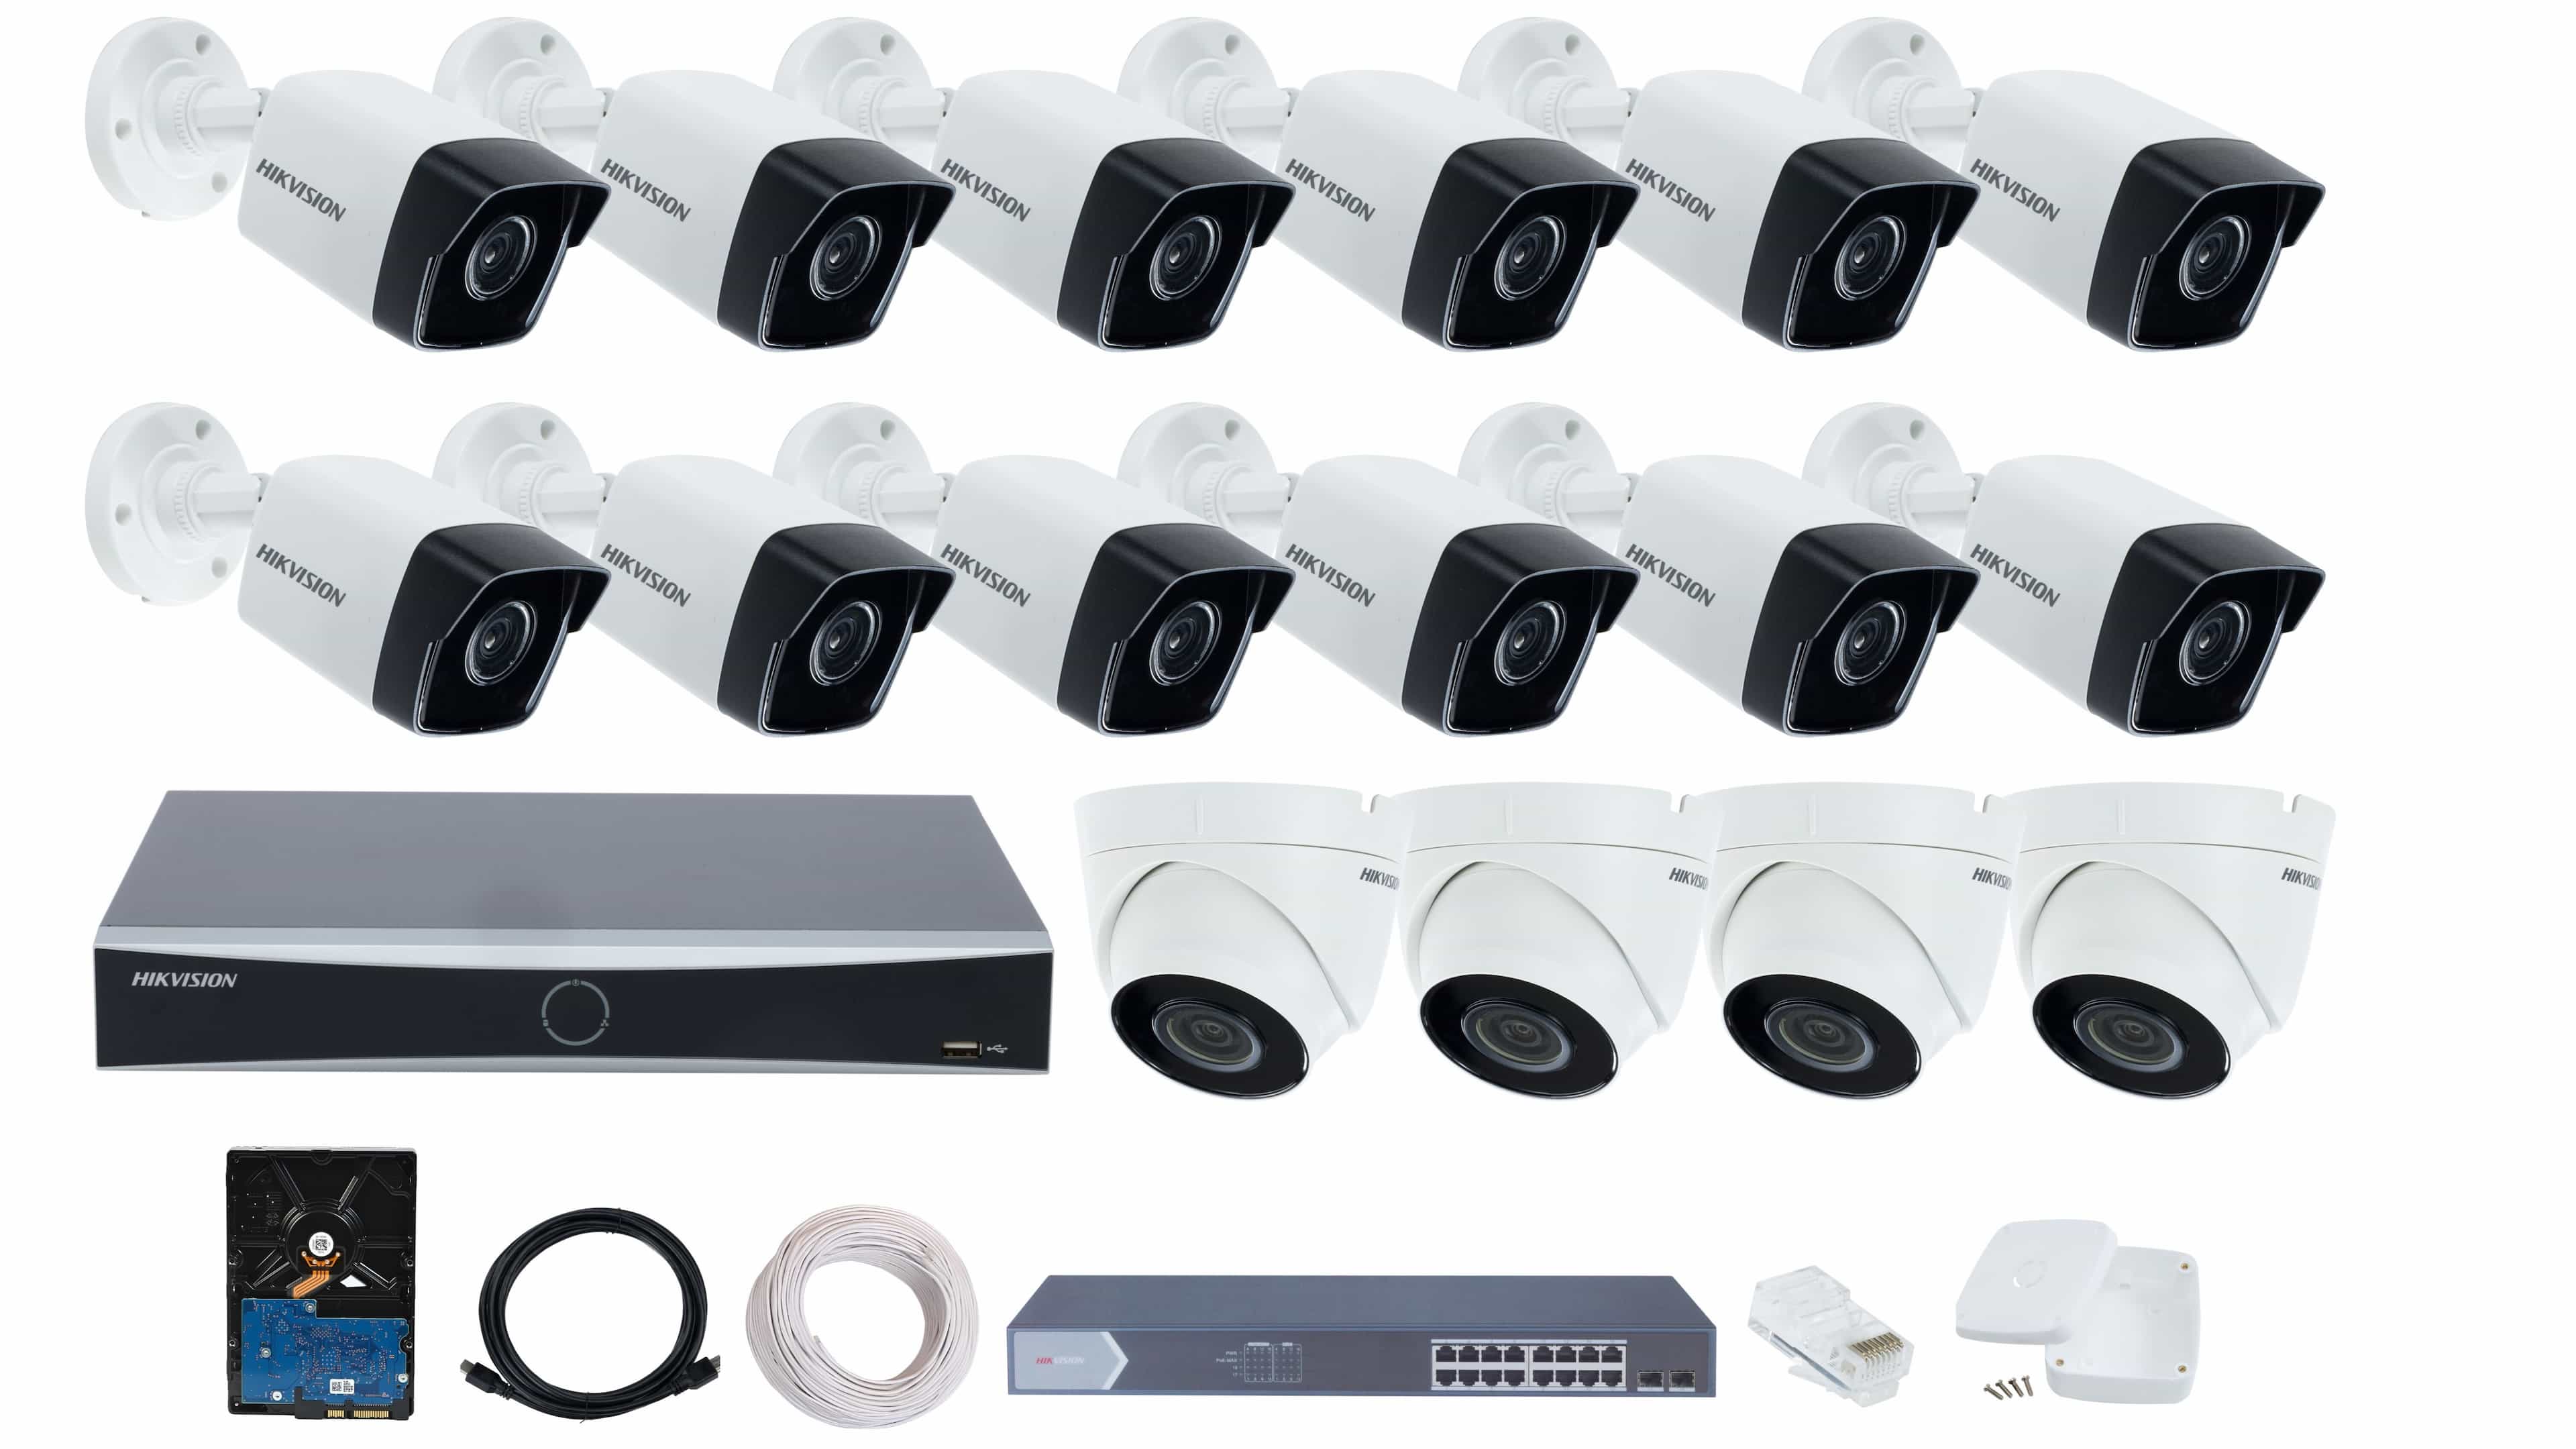 HIKVISION 16 CCTV IP Camera Full Set with 16 Channel 4K NVR, 16 x 2MP Bullet IP Camera, 16 Port PoE Switch, 2TB HDD, RJ45, Cobox, Cat6 90m, HDMI Cable